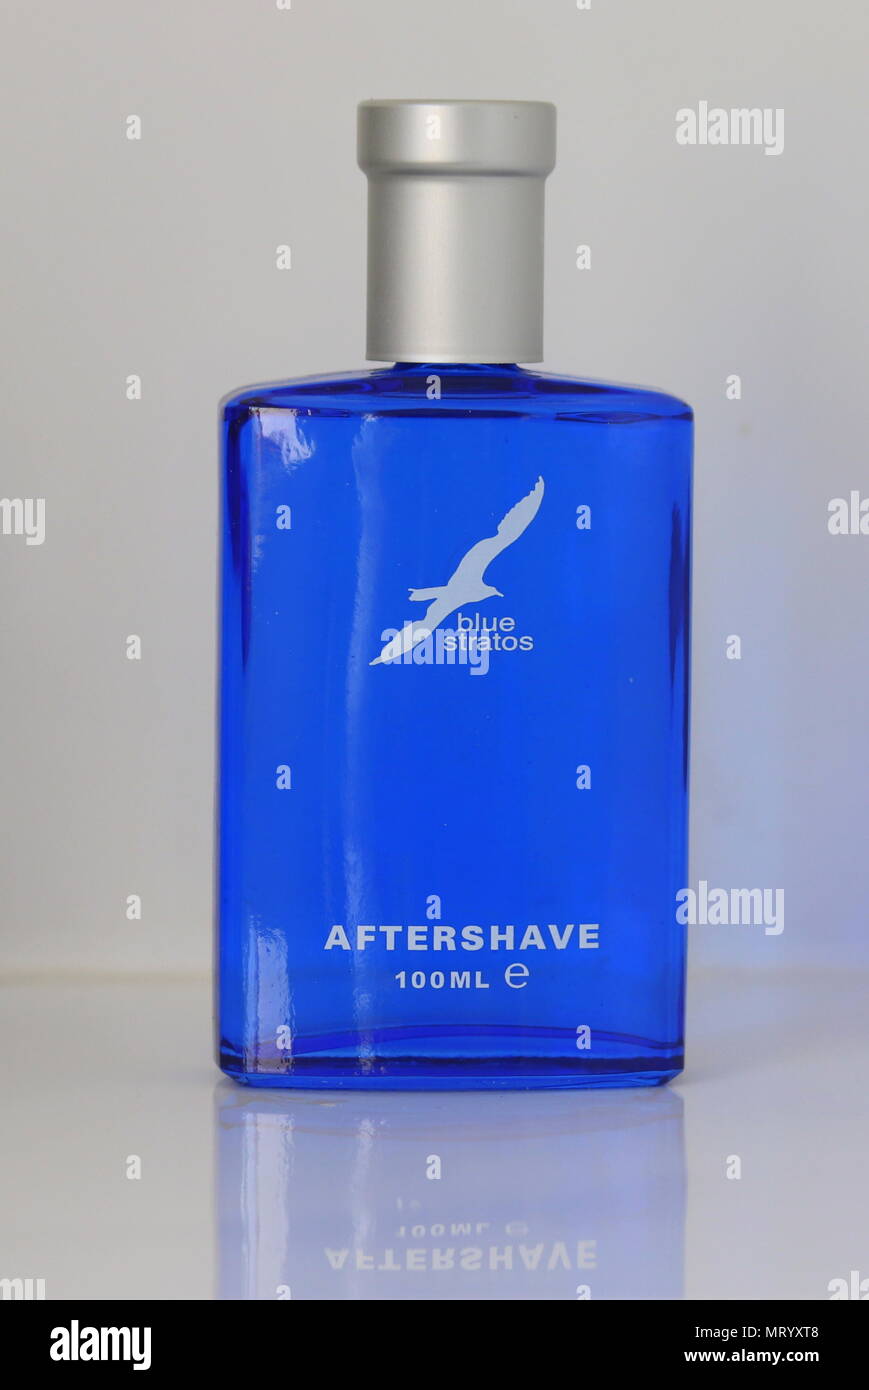 Blue Stratos Aftershave Stockfoto